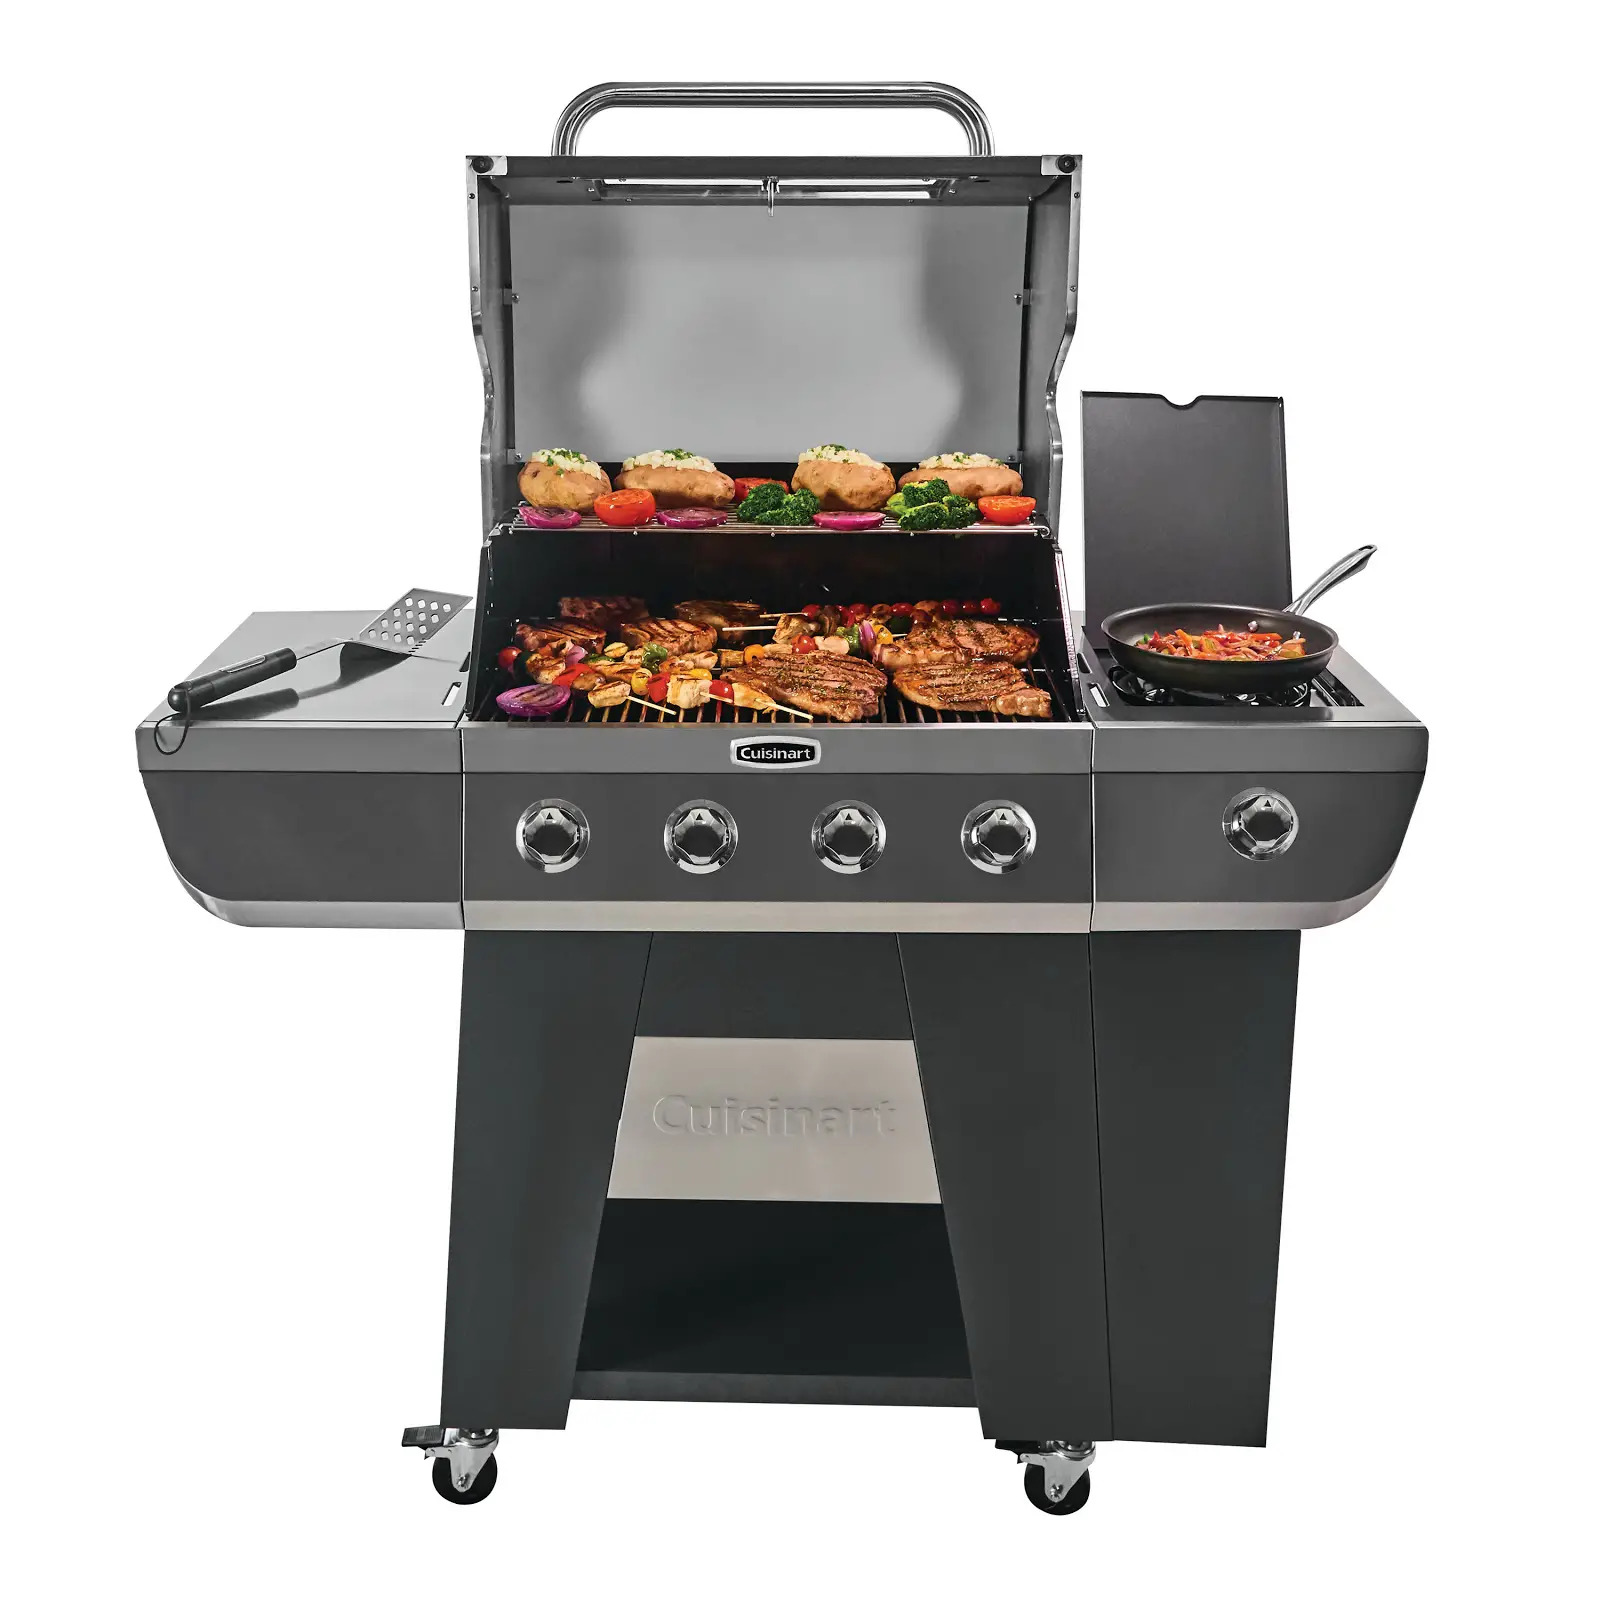 3-in-1 Stainless 5 Burner Gas Grill [GAS9556AS, GAS9556ASO]